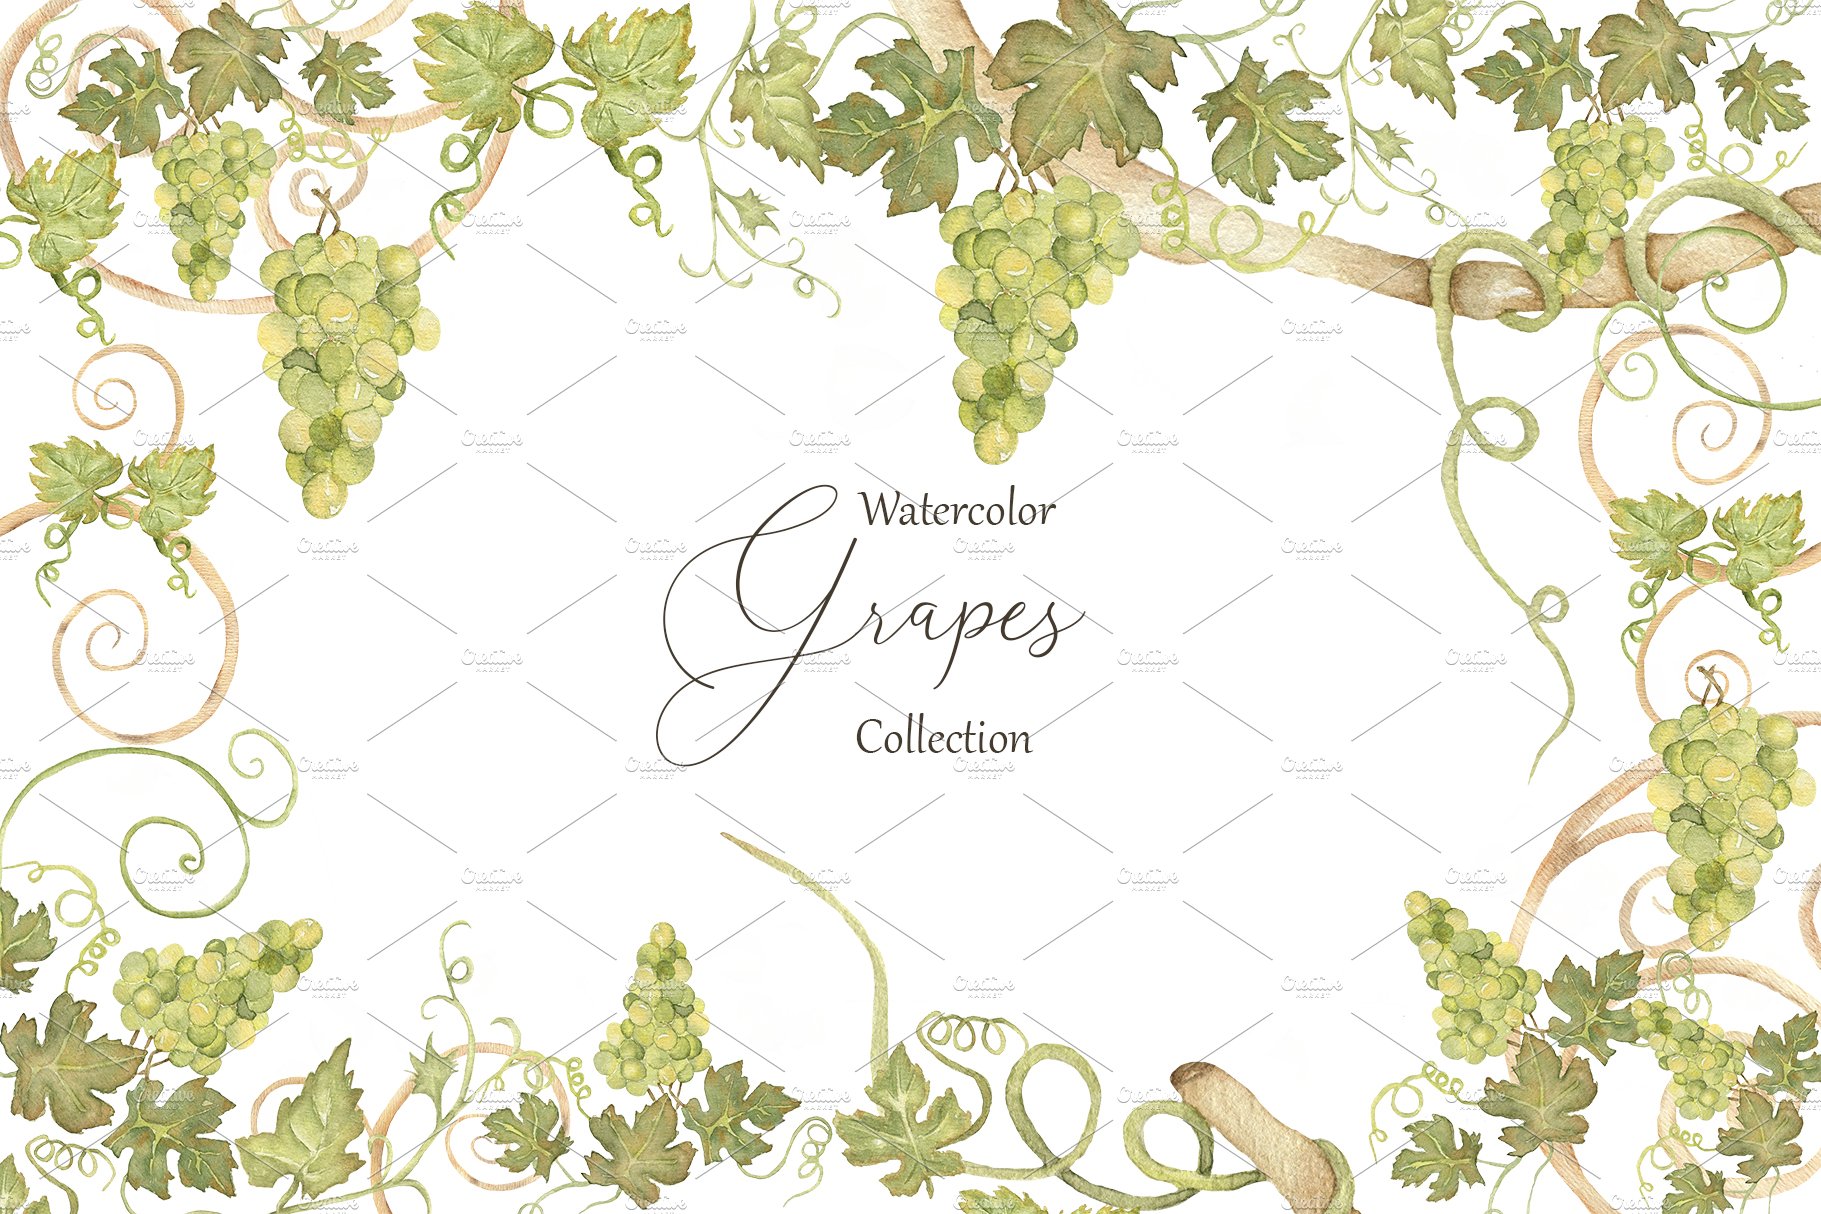 Watercolor Grapes cover image.